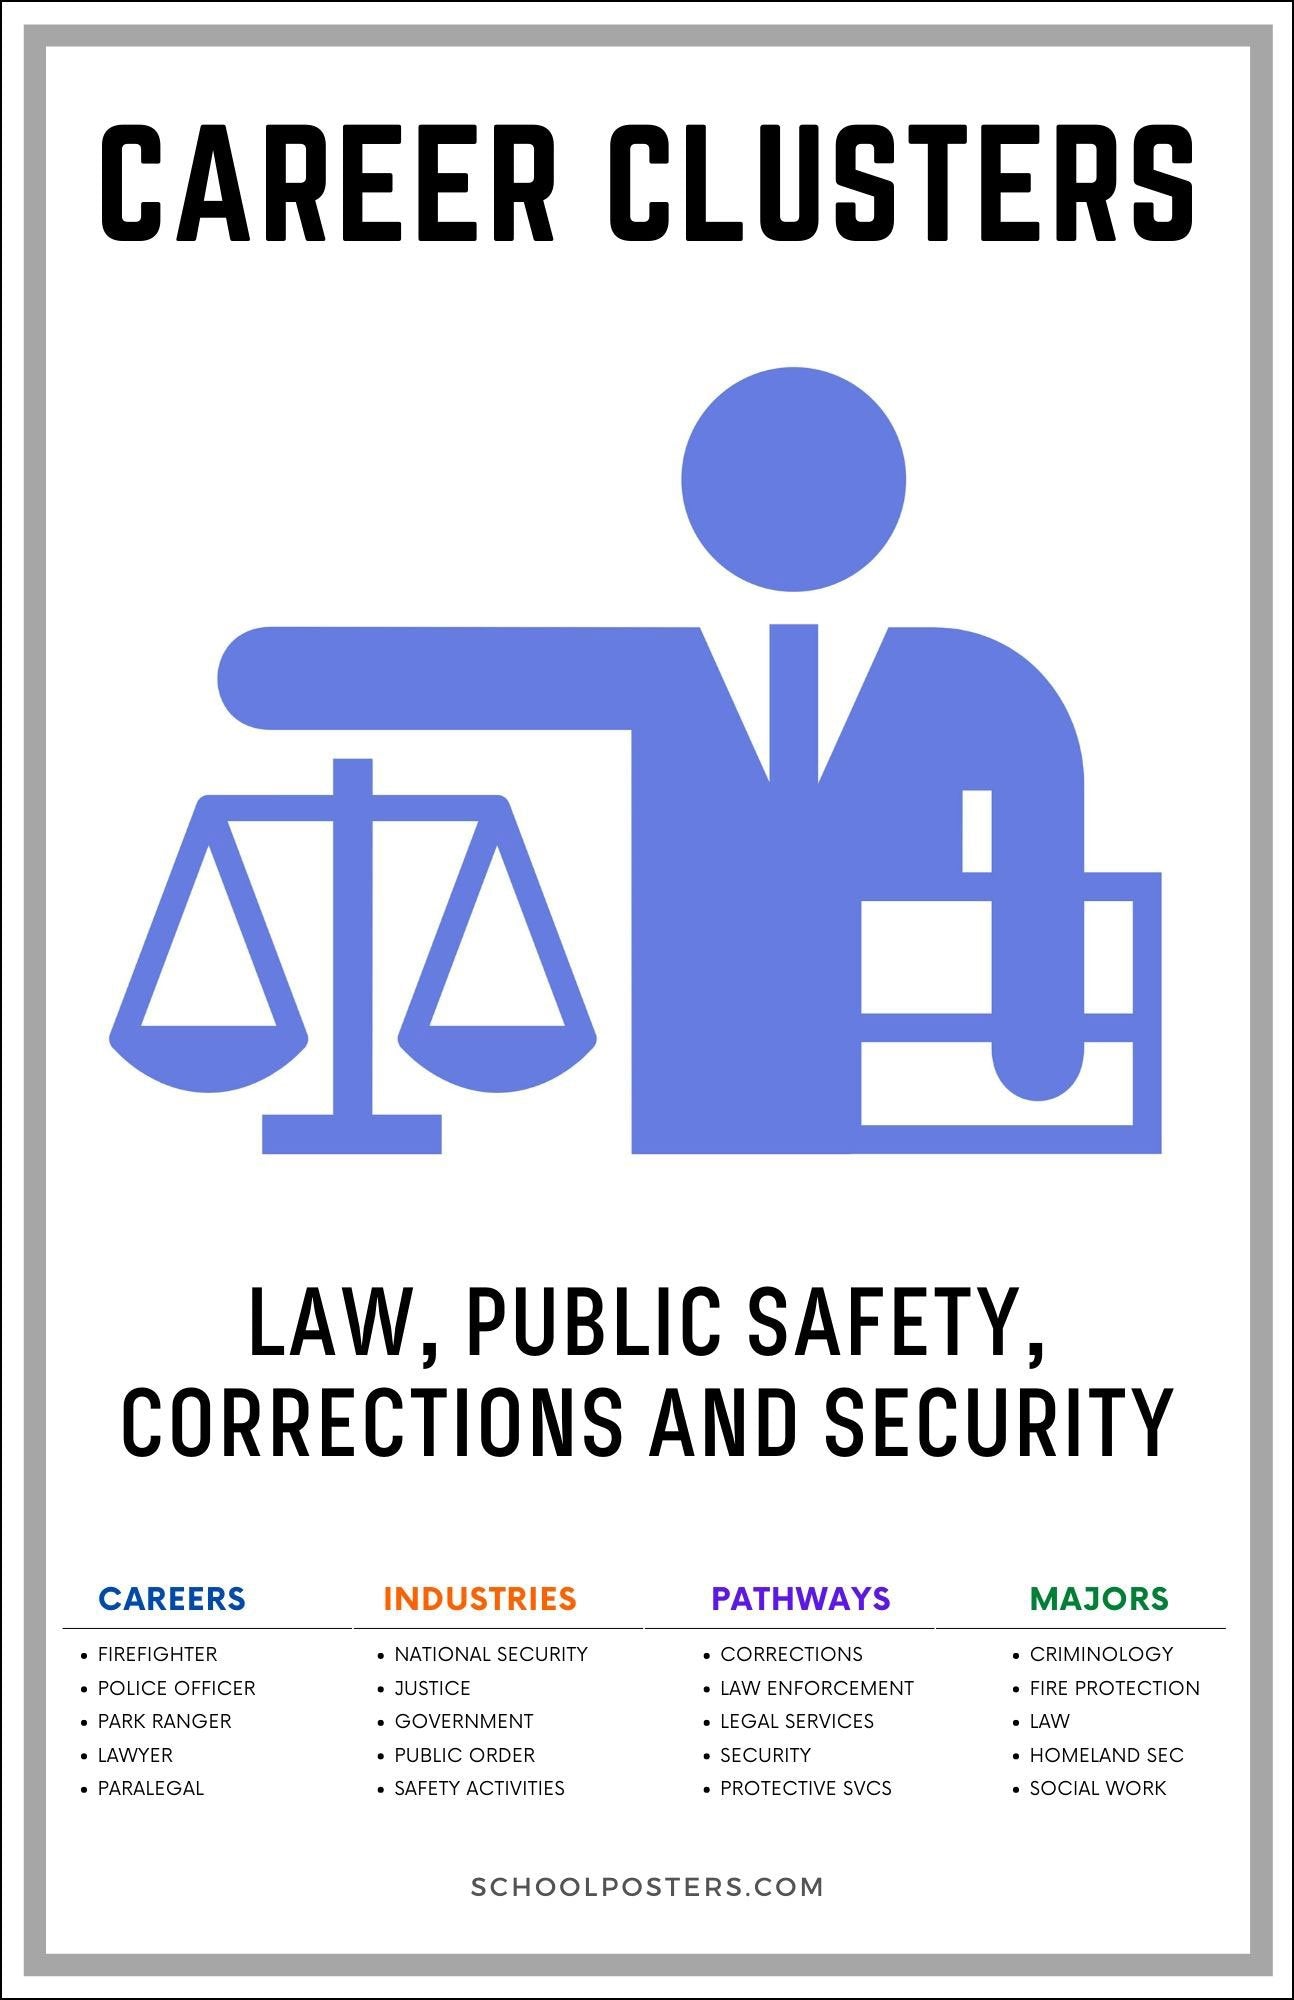 Career Clusters Law Public Safety Corrections And Security Poster